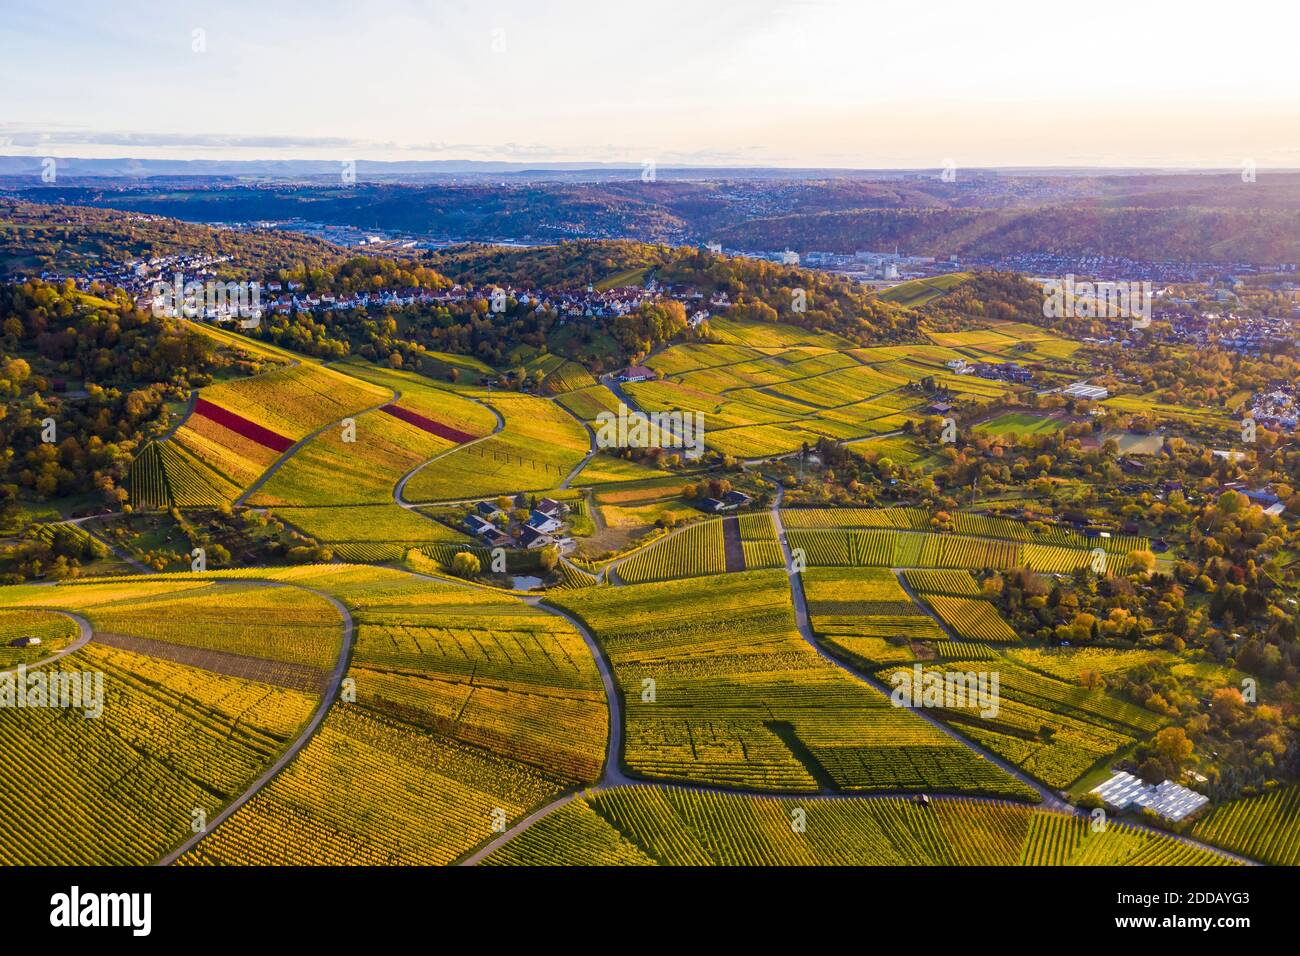 Germany, Baden-Wurttemberg, Rotenberg, Aerial view of vast countryside vineyards at autumn dusk Stock Photo